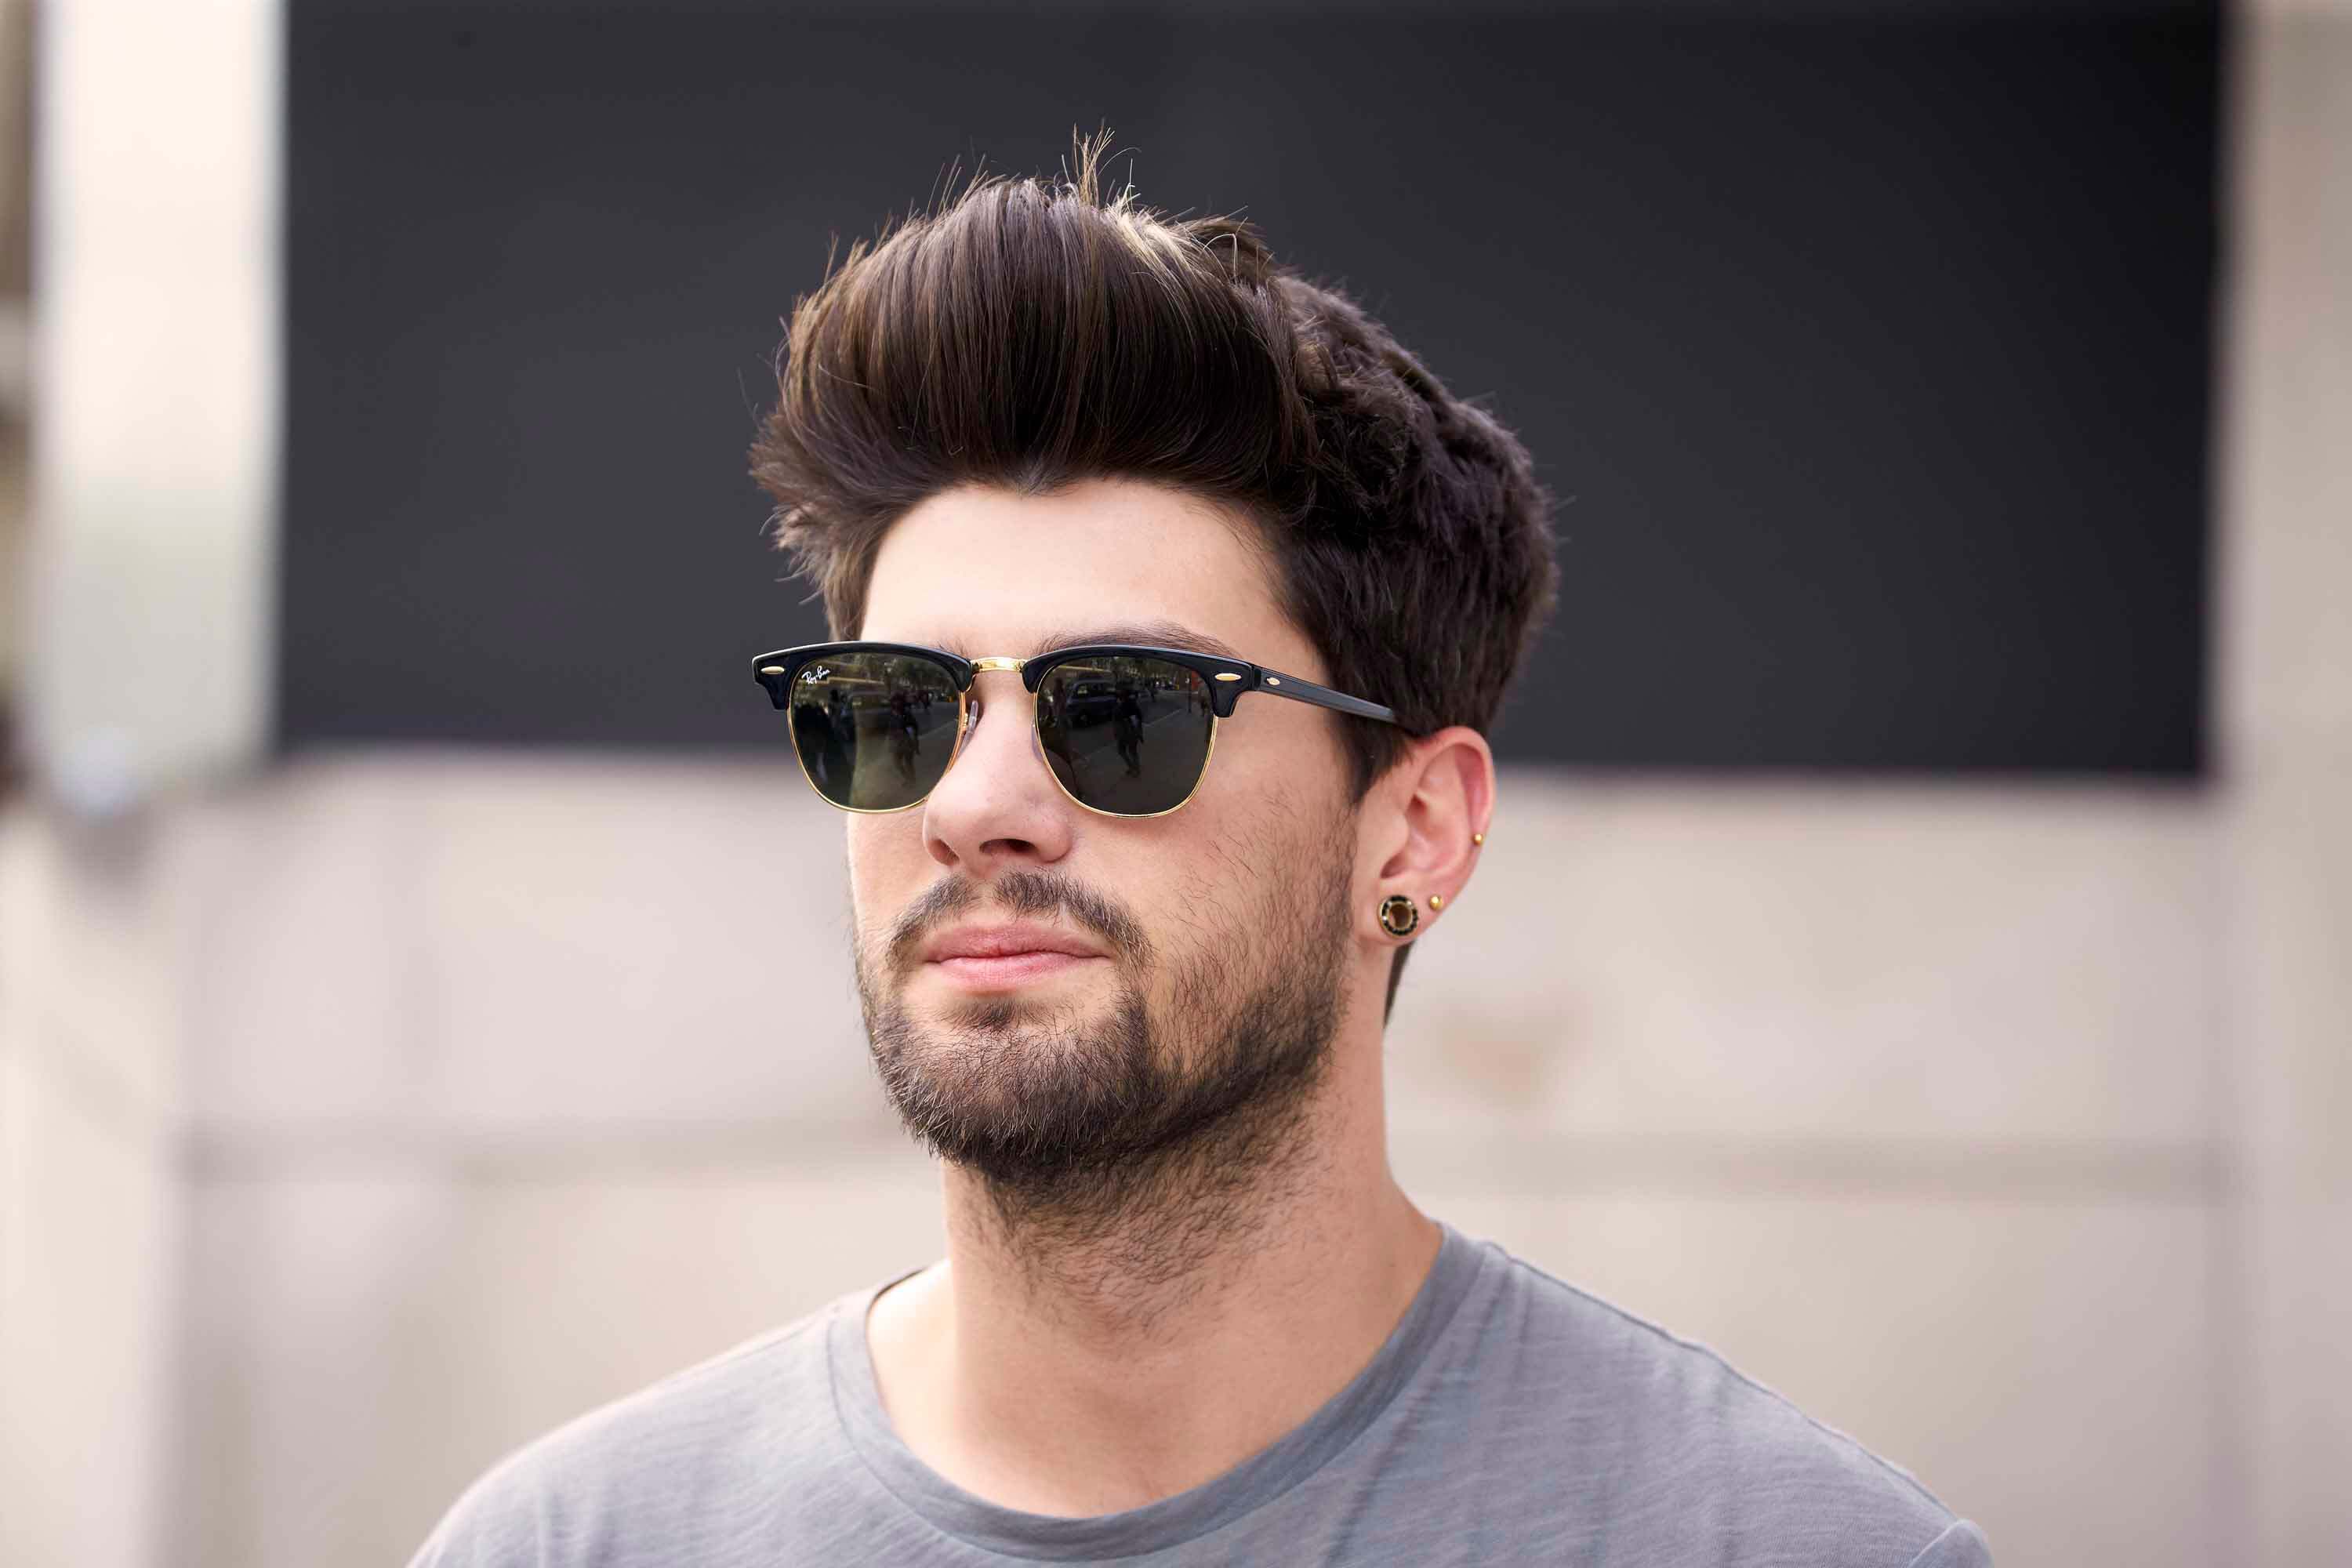 Hairstyle Tips For Men With Thick Hair — Rebecca Beardsley's ShineForth  Salon